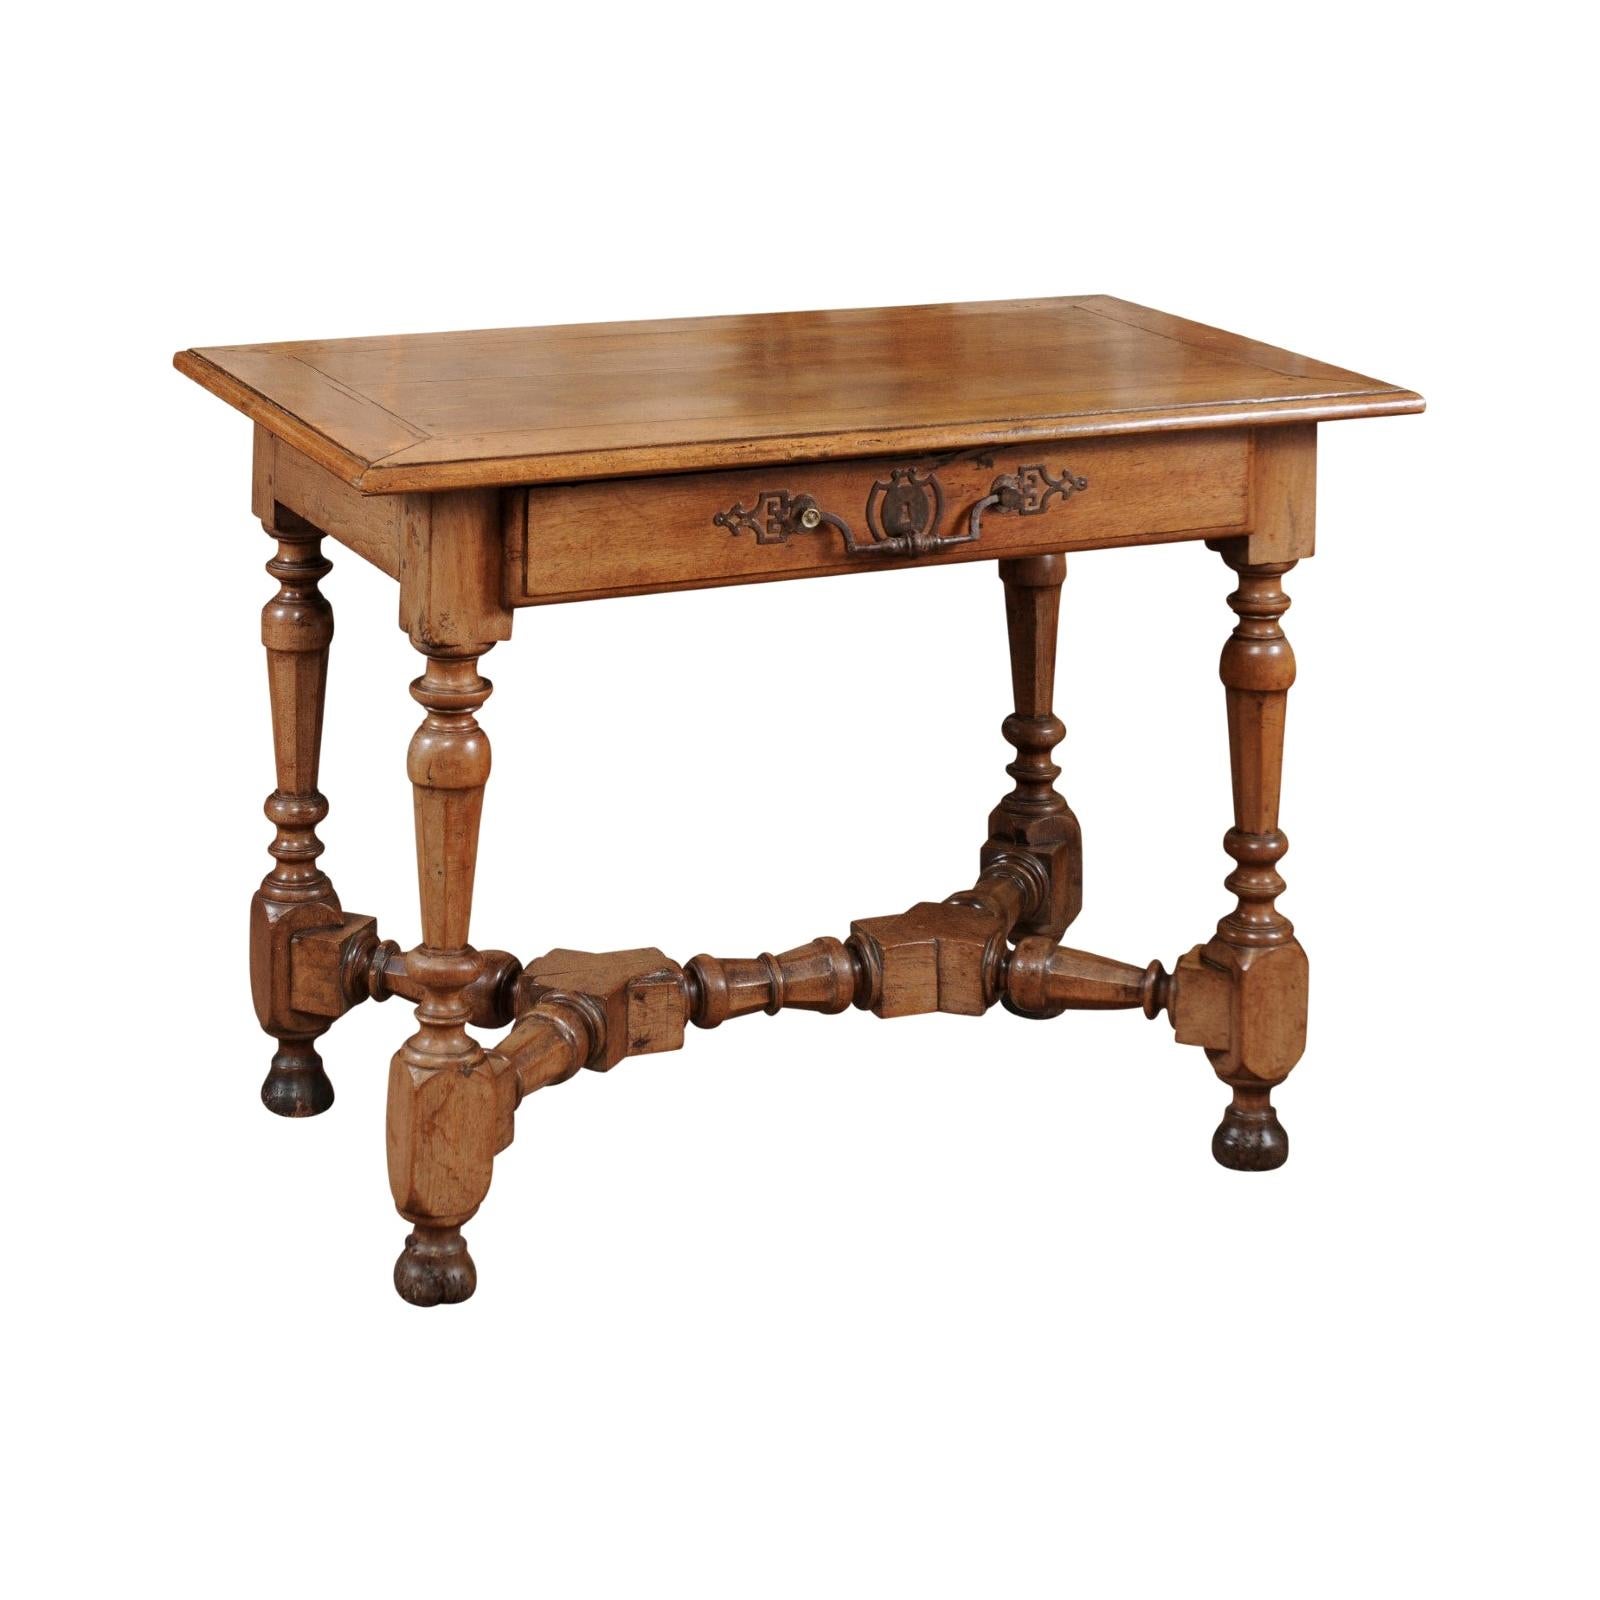 French Louis XIV Walnut Table, Early 18th Century For Sale